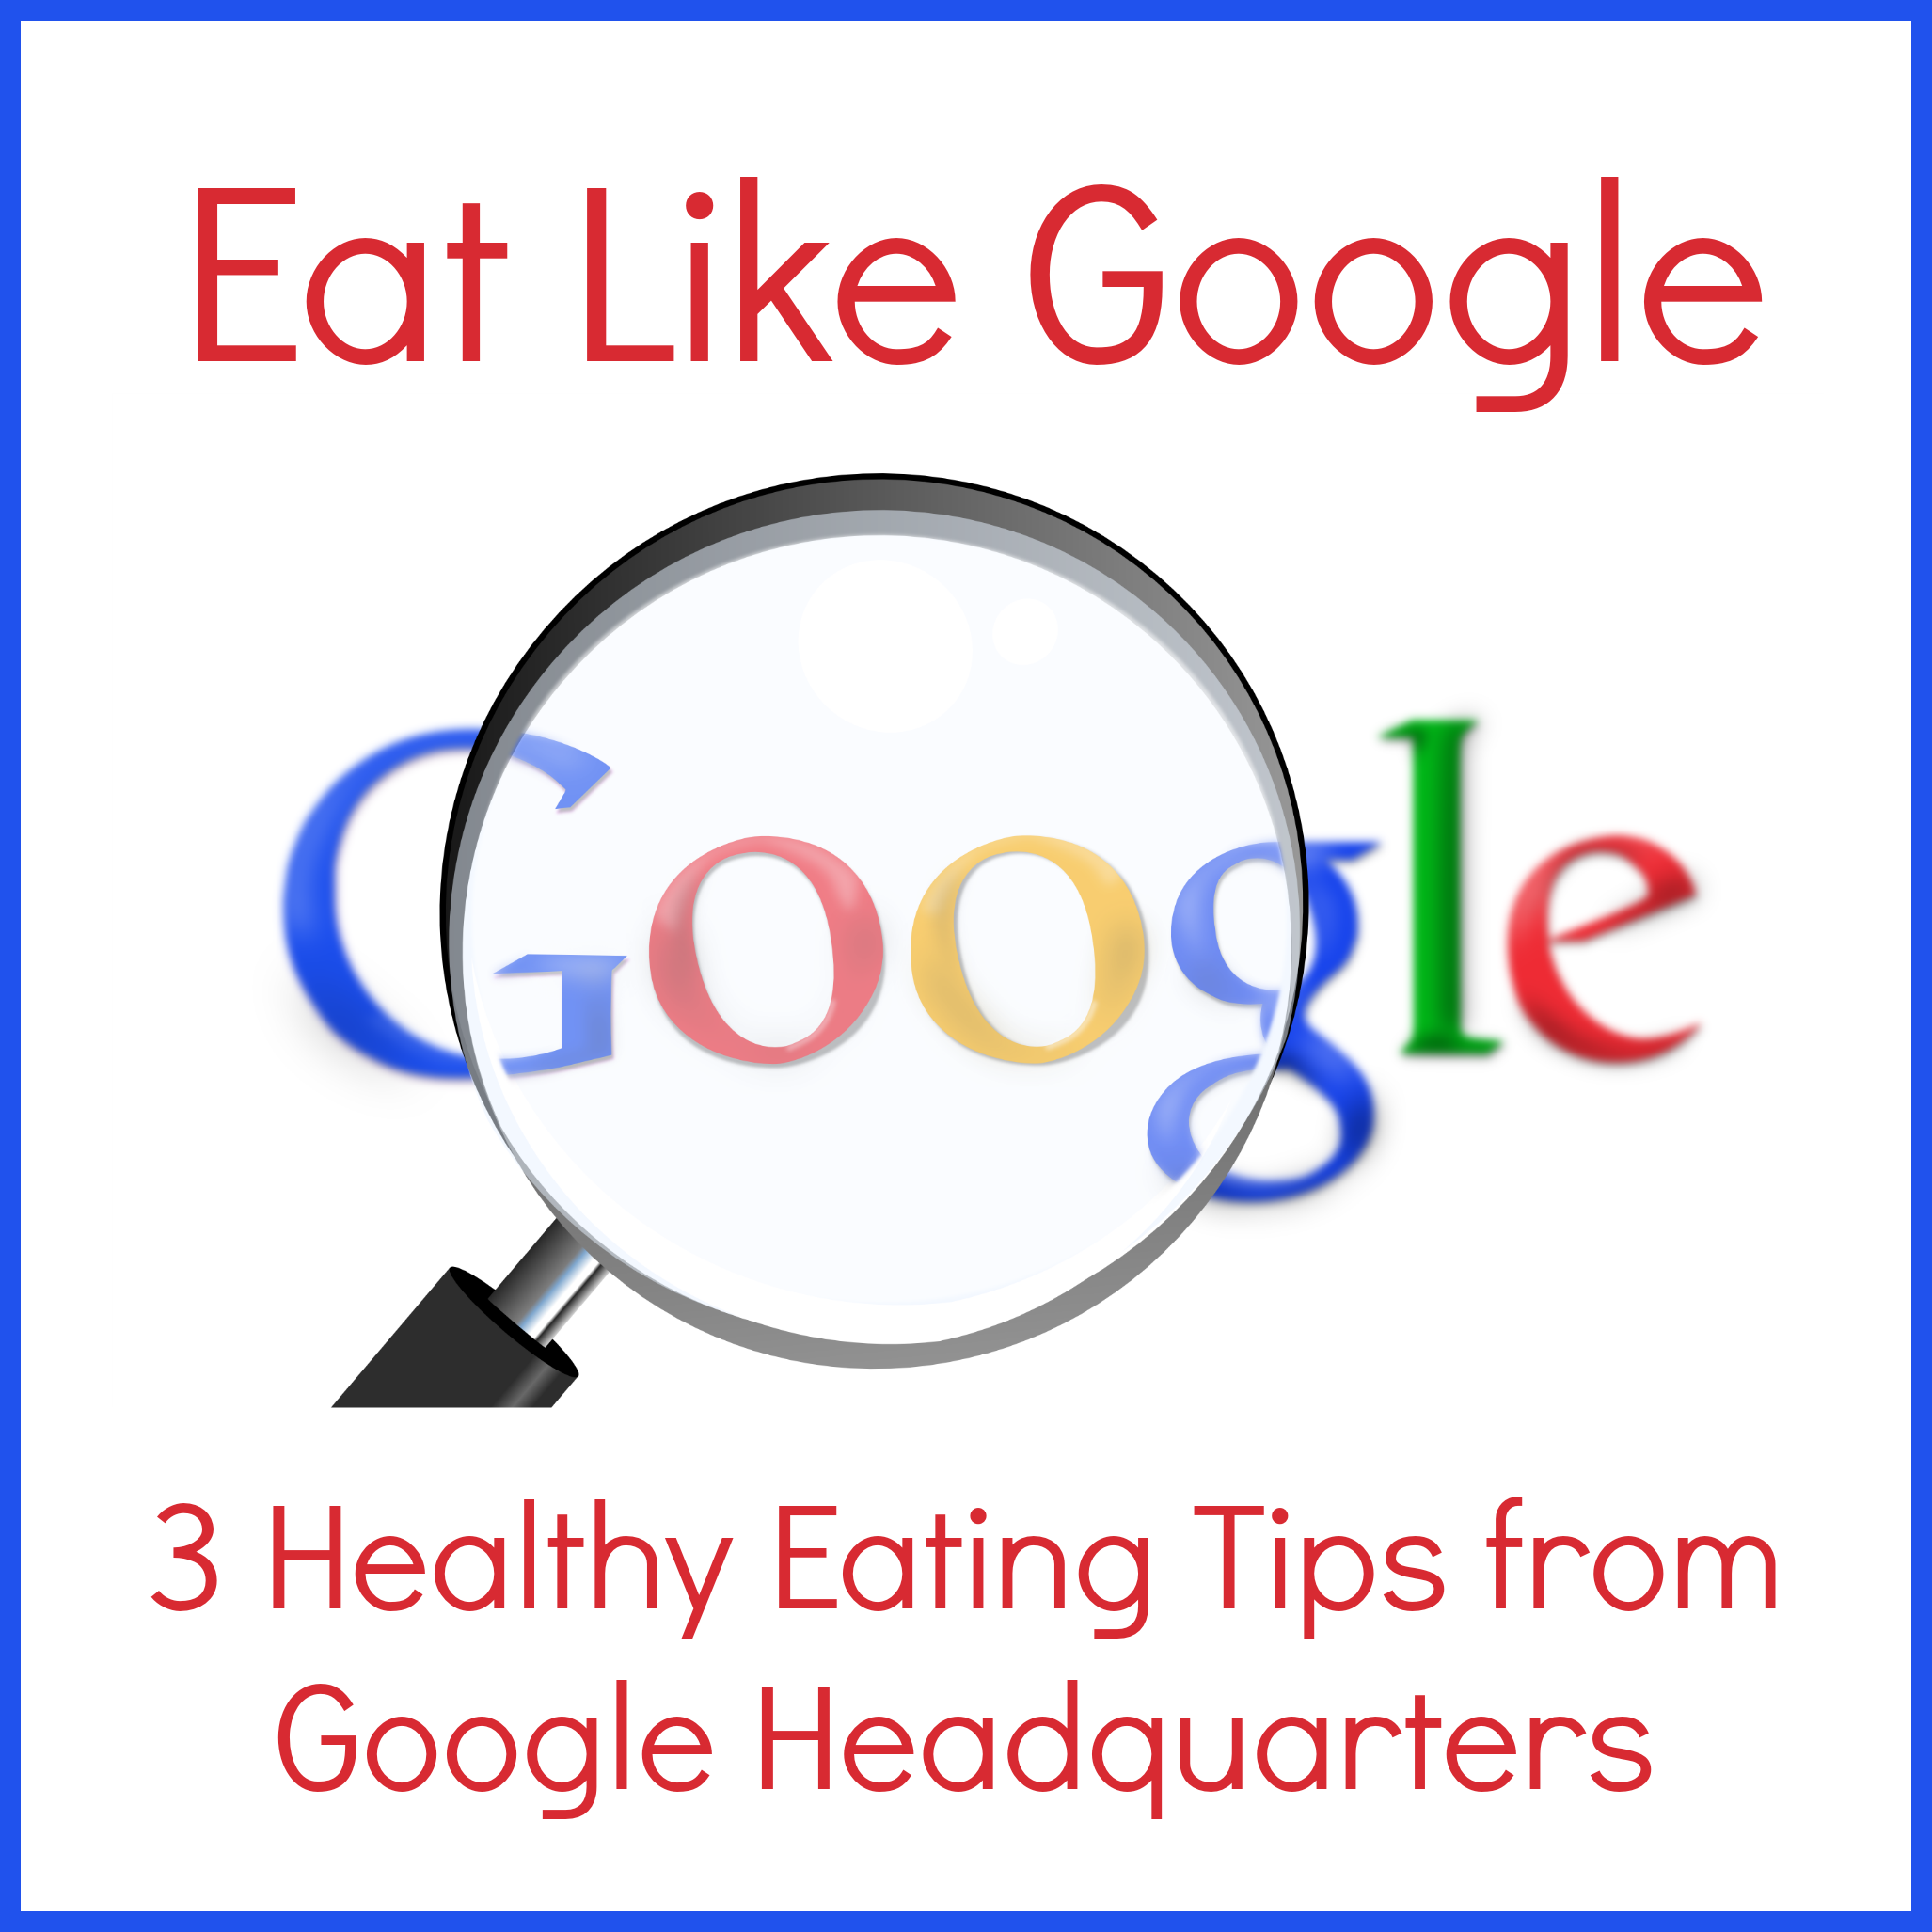 Healthy Eating Tips from Google